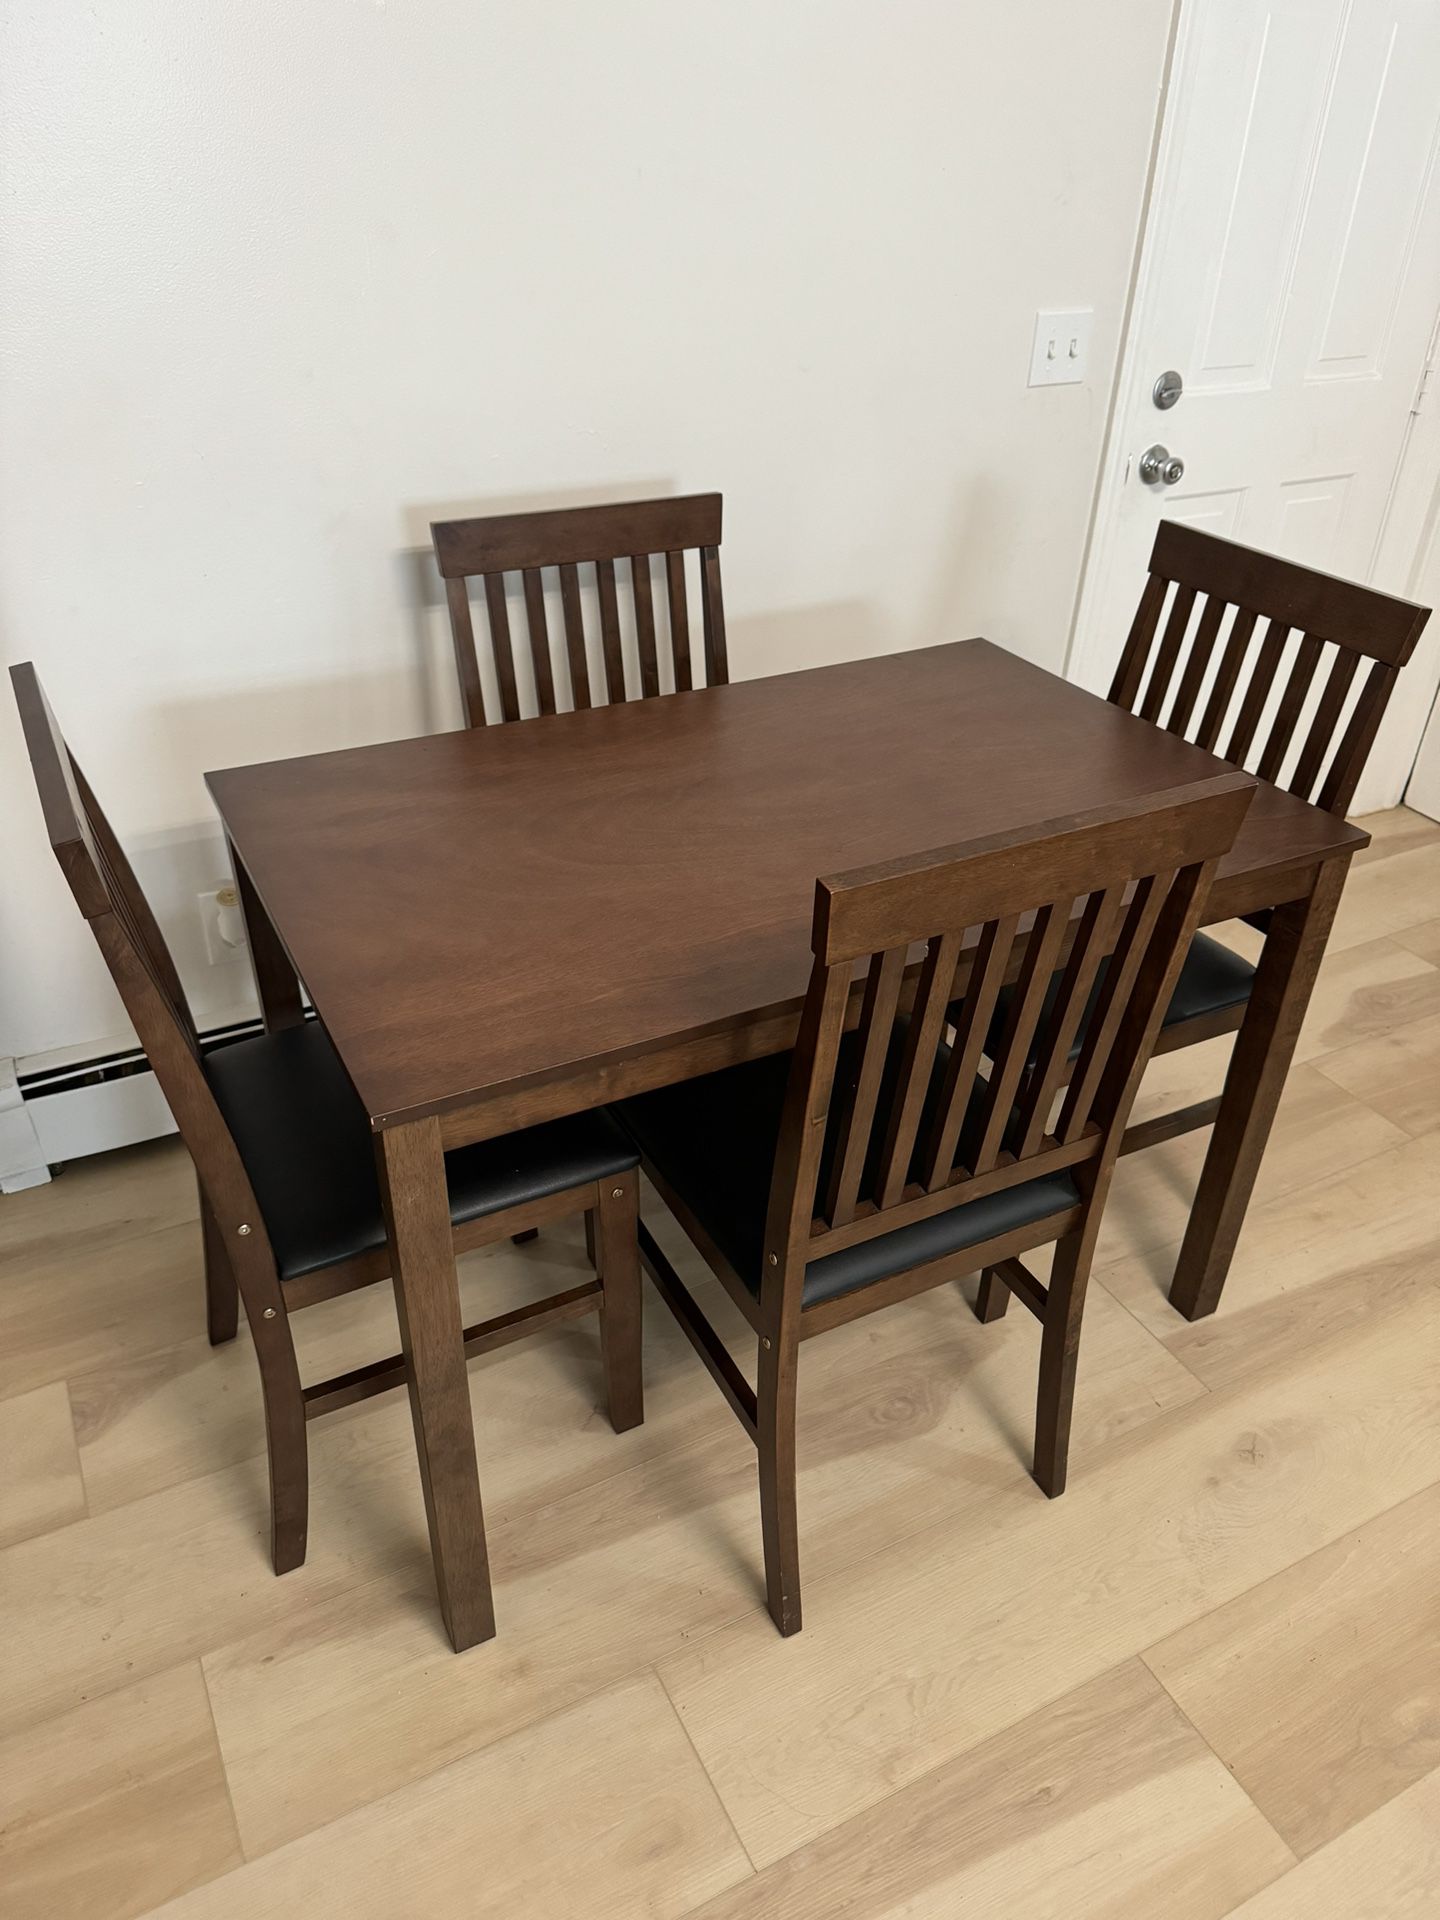 Dining Table And Chair 